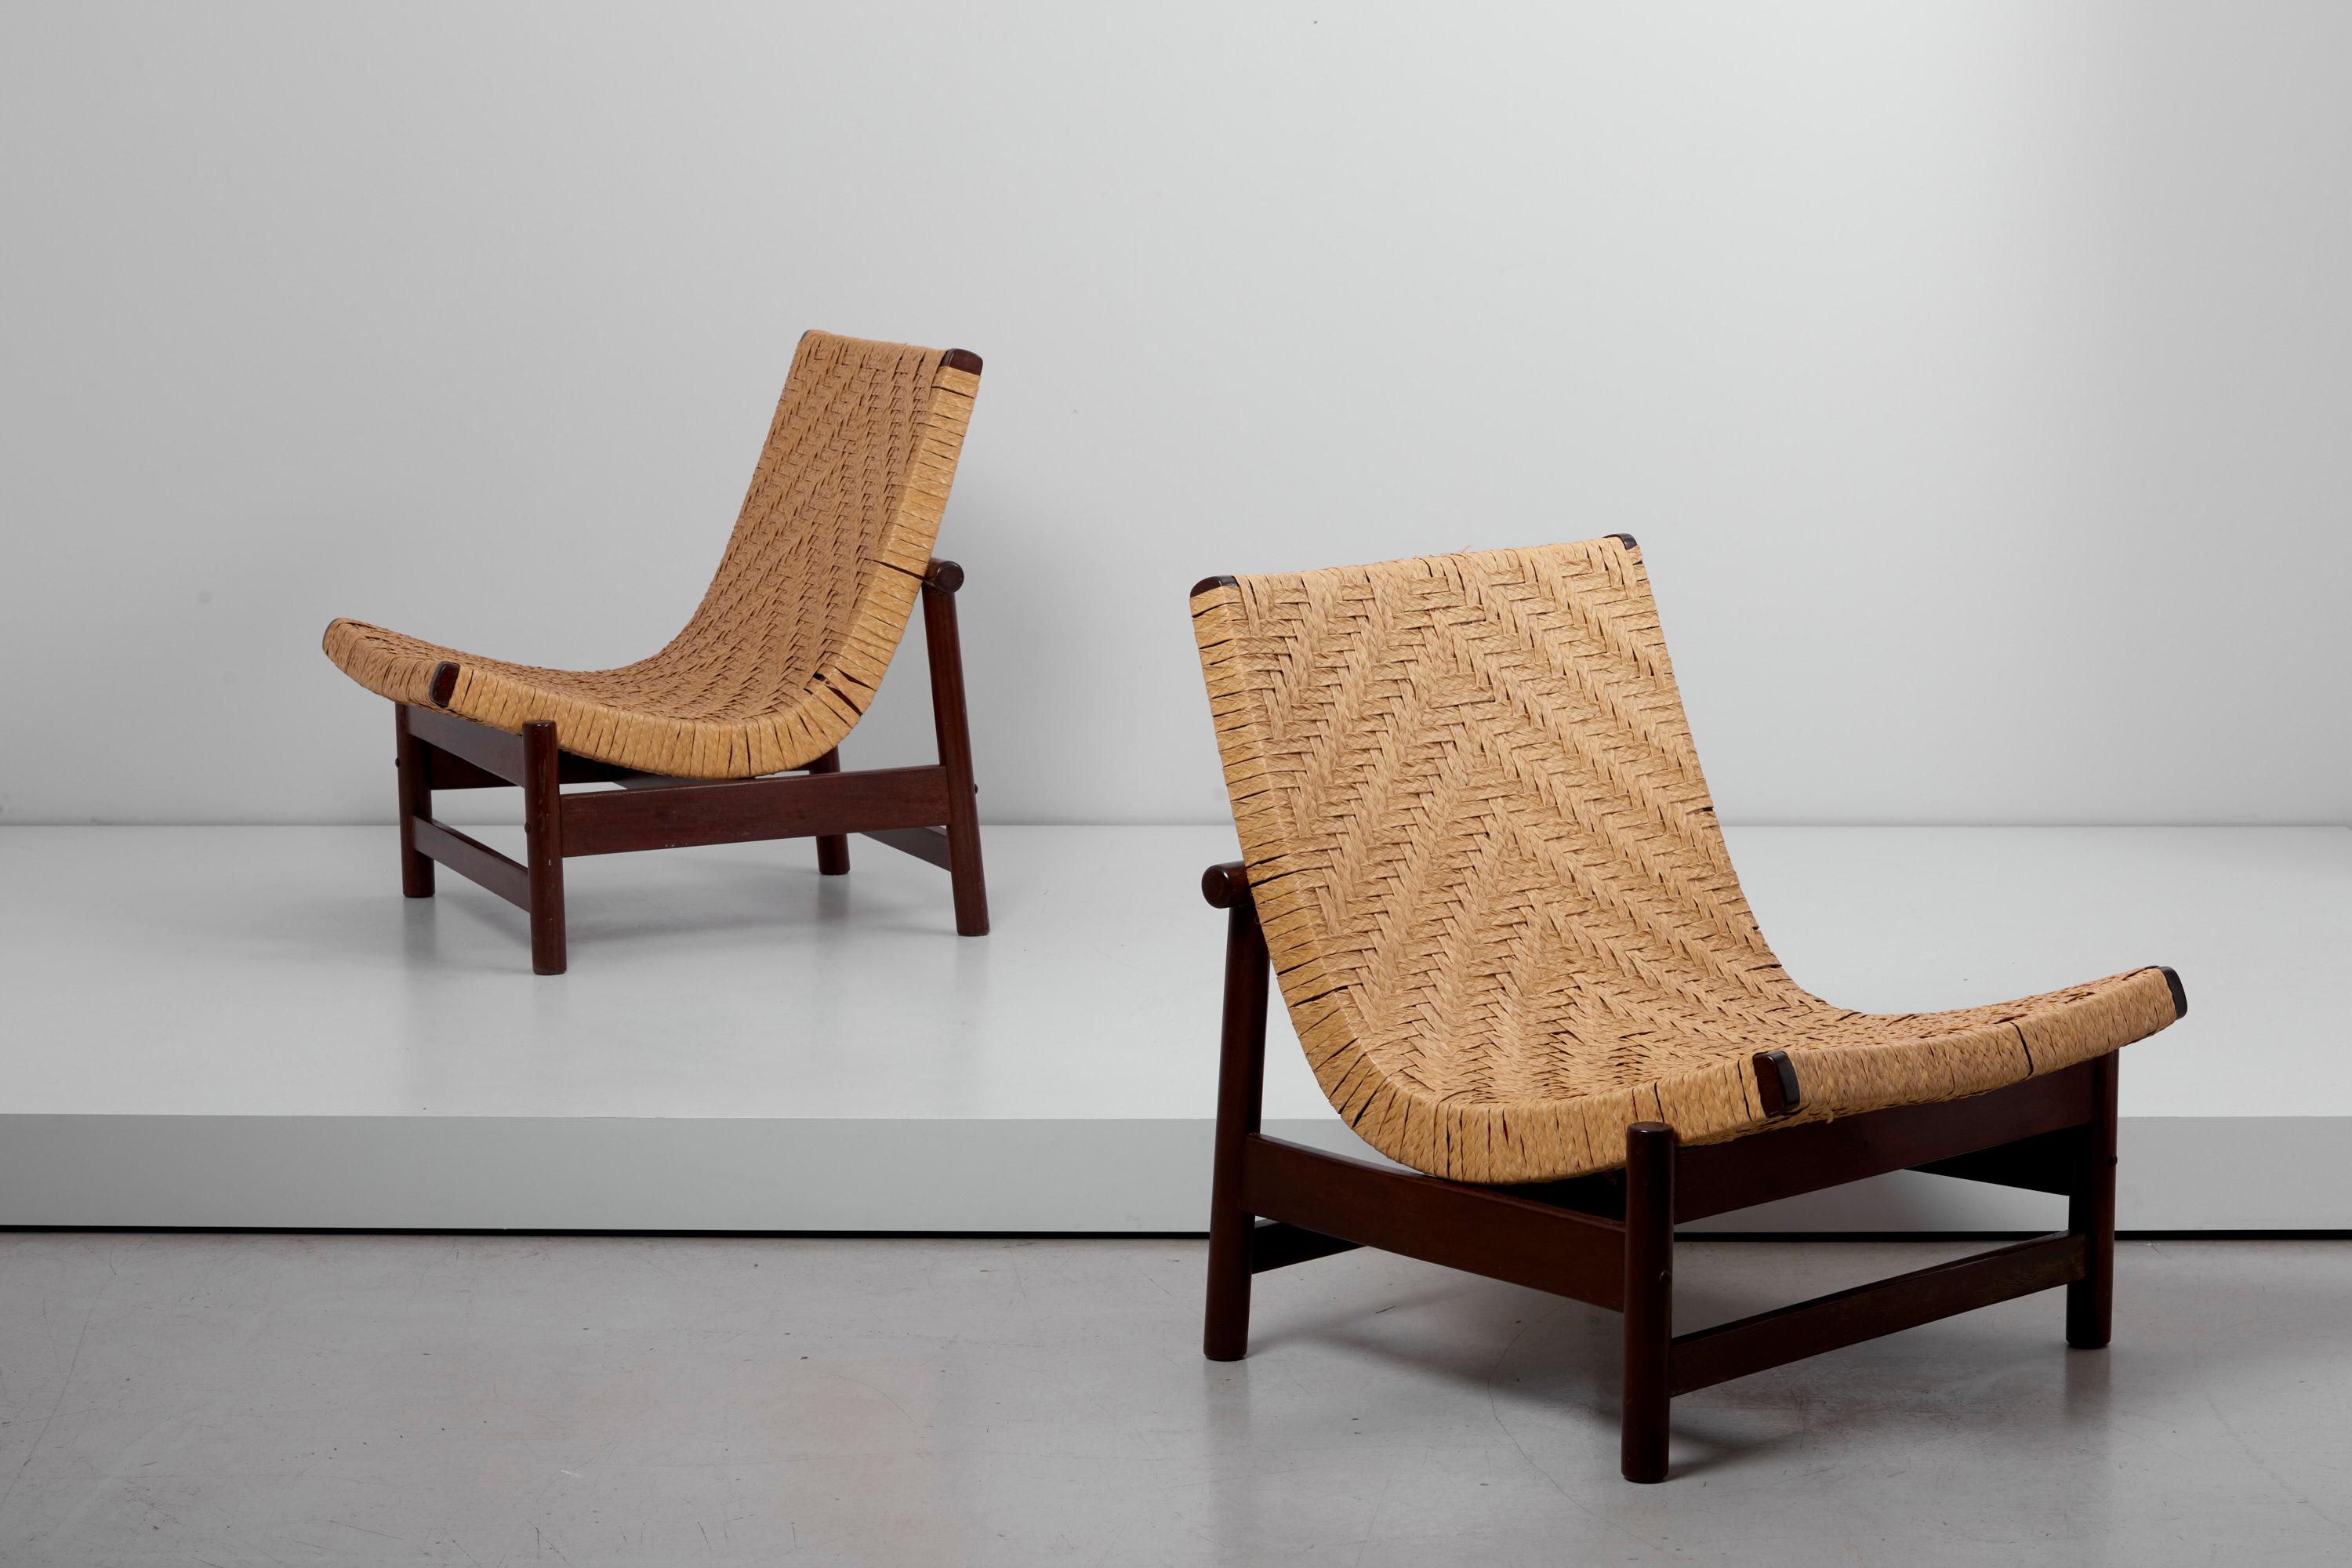 Rare pair of Guama easy chairs, designed in the late 1950s by Gonzalo Cordoba and manufactured by Dujo in Cuba.